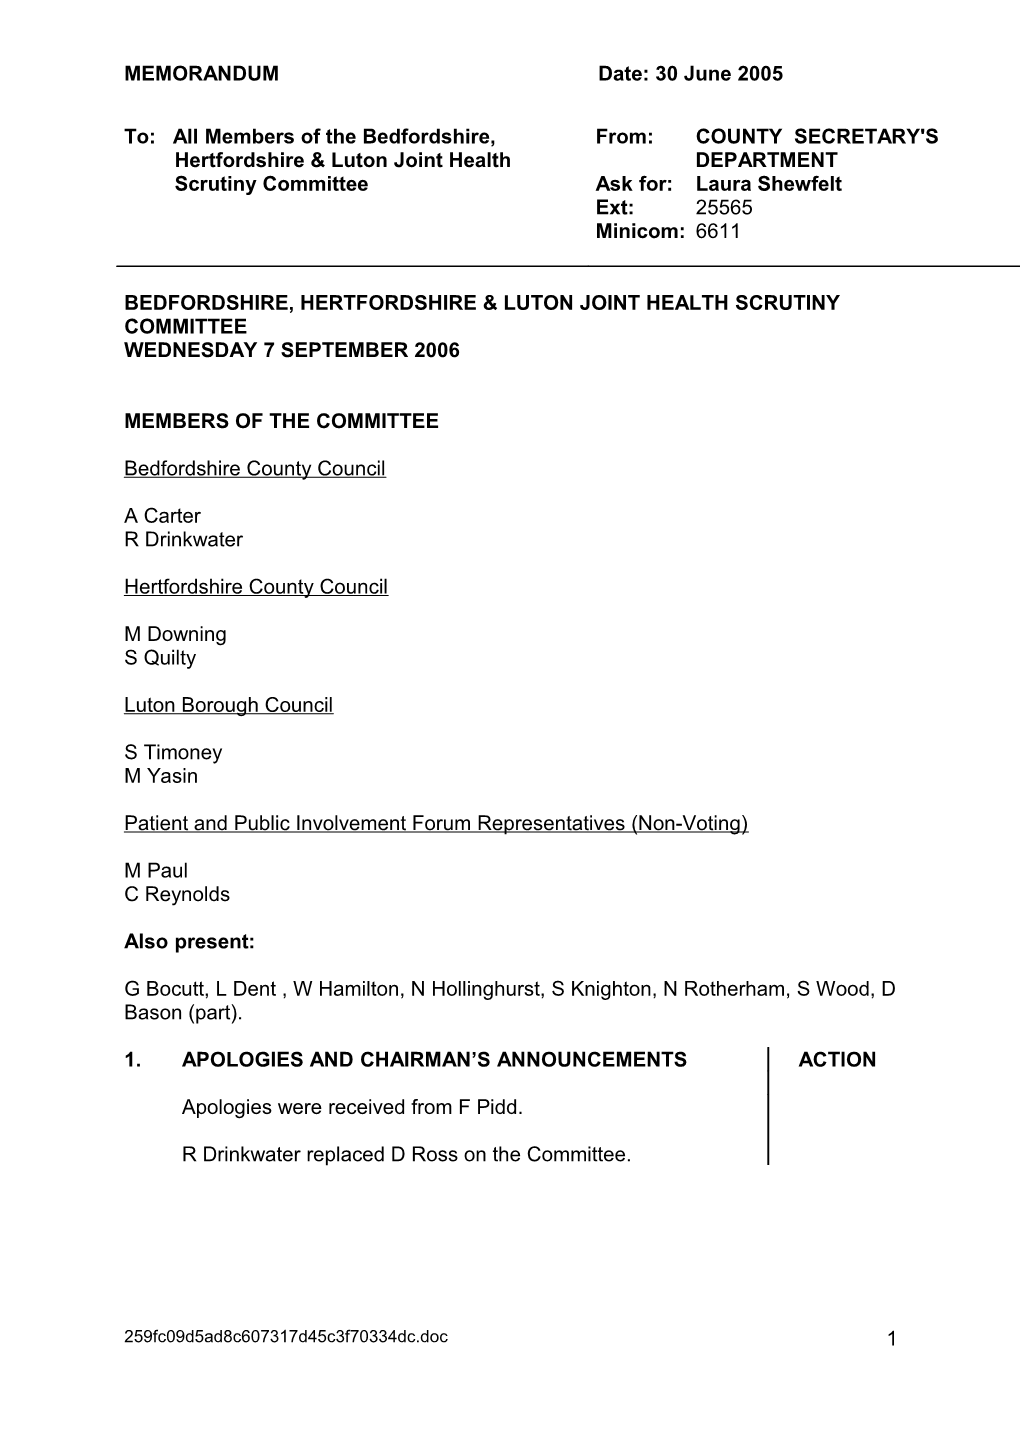 Bedfordshire, Hertfordshire & Luton Joint Health Scrutiny Committee s1